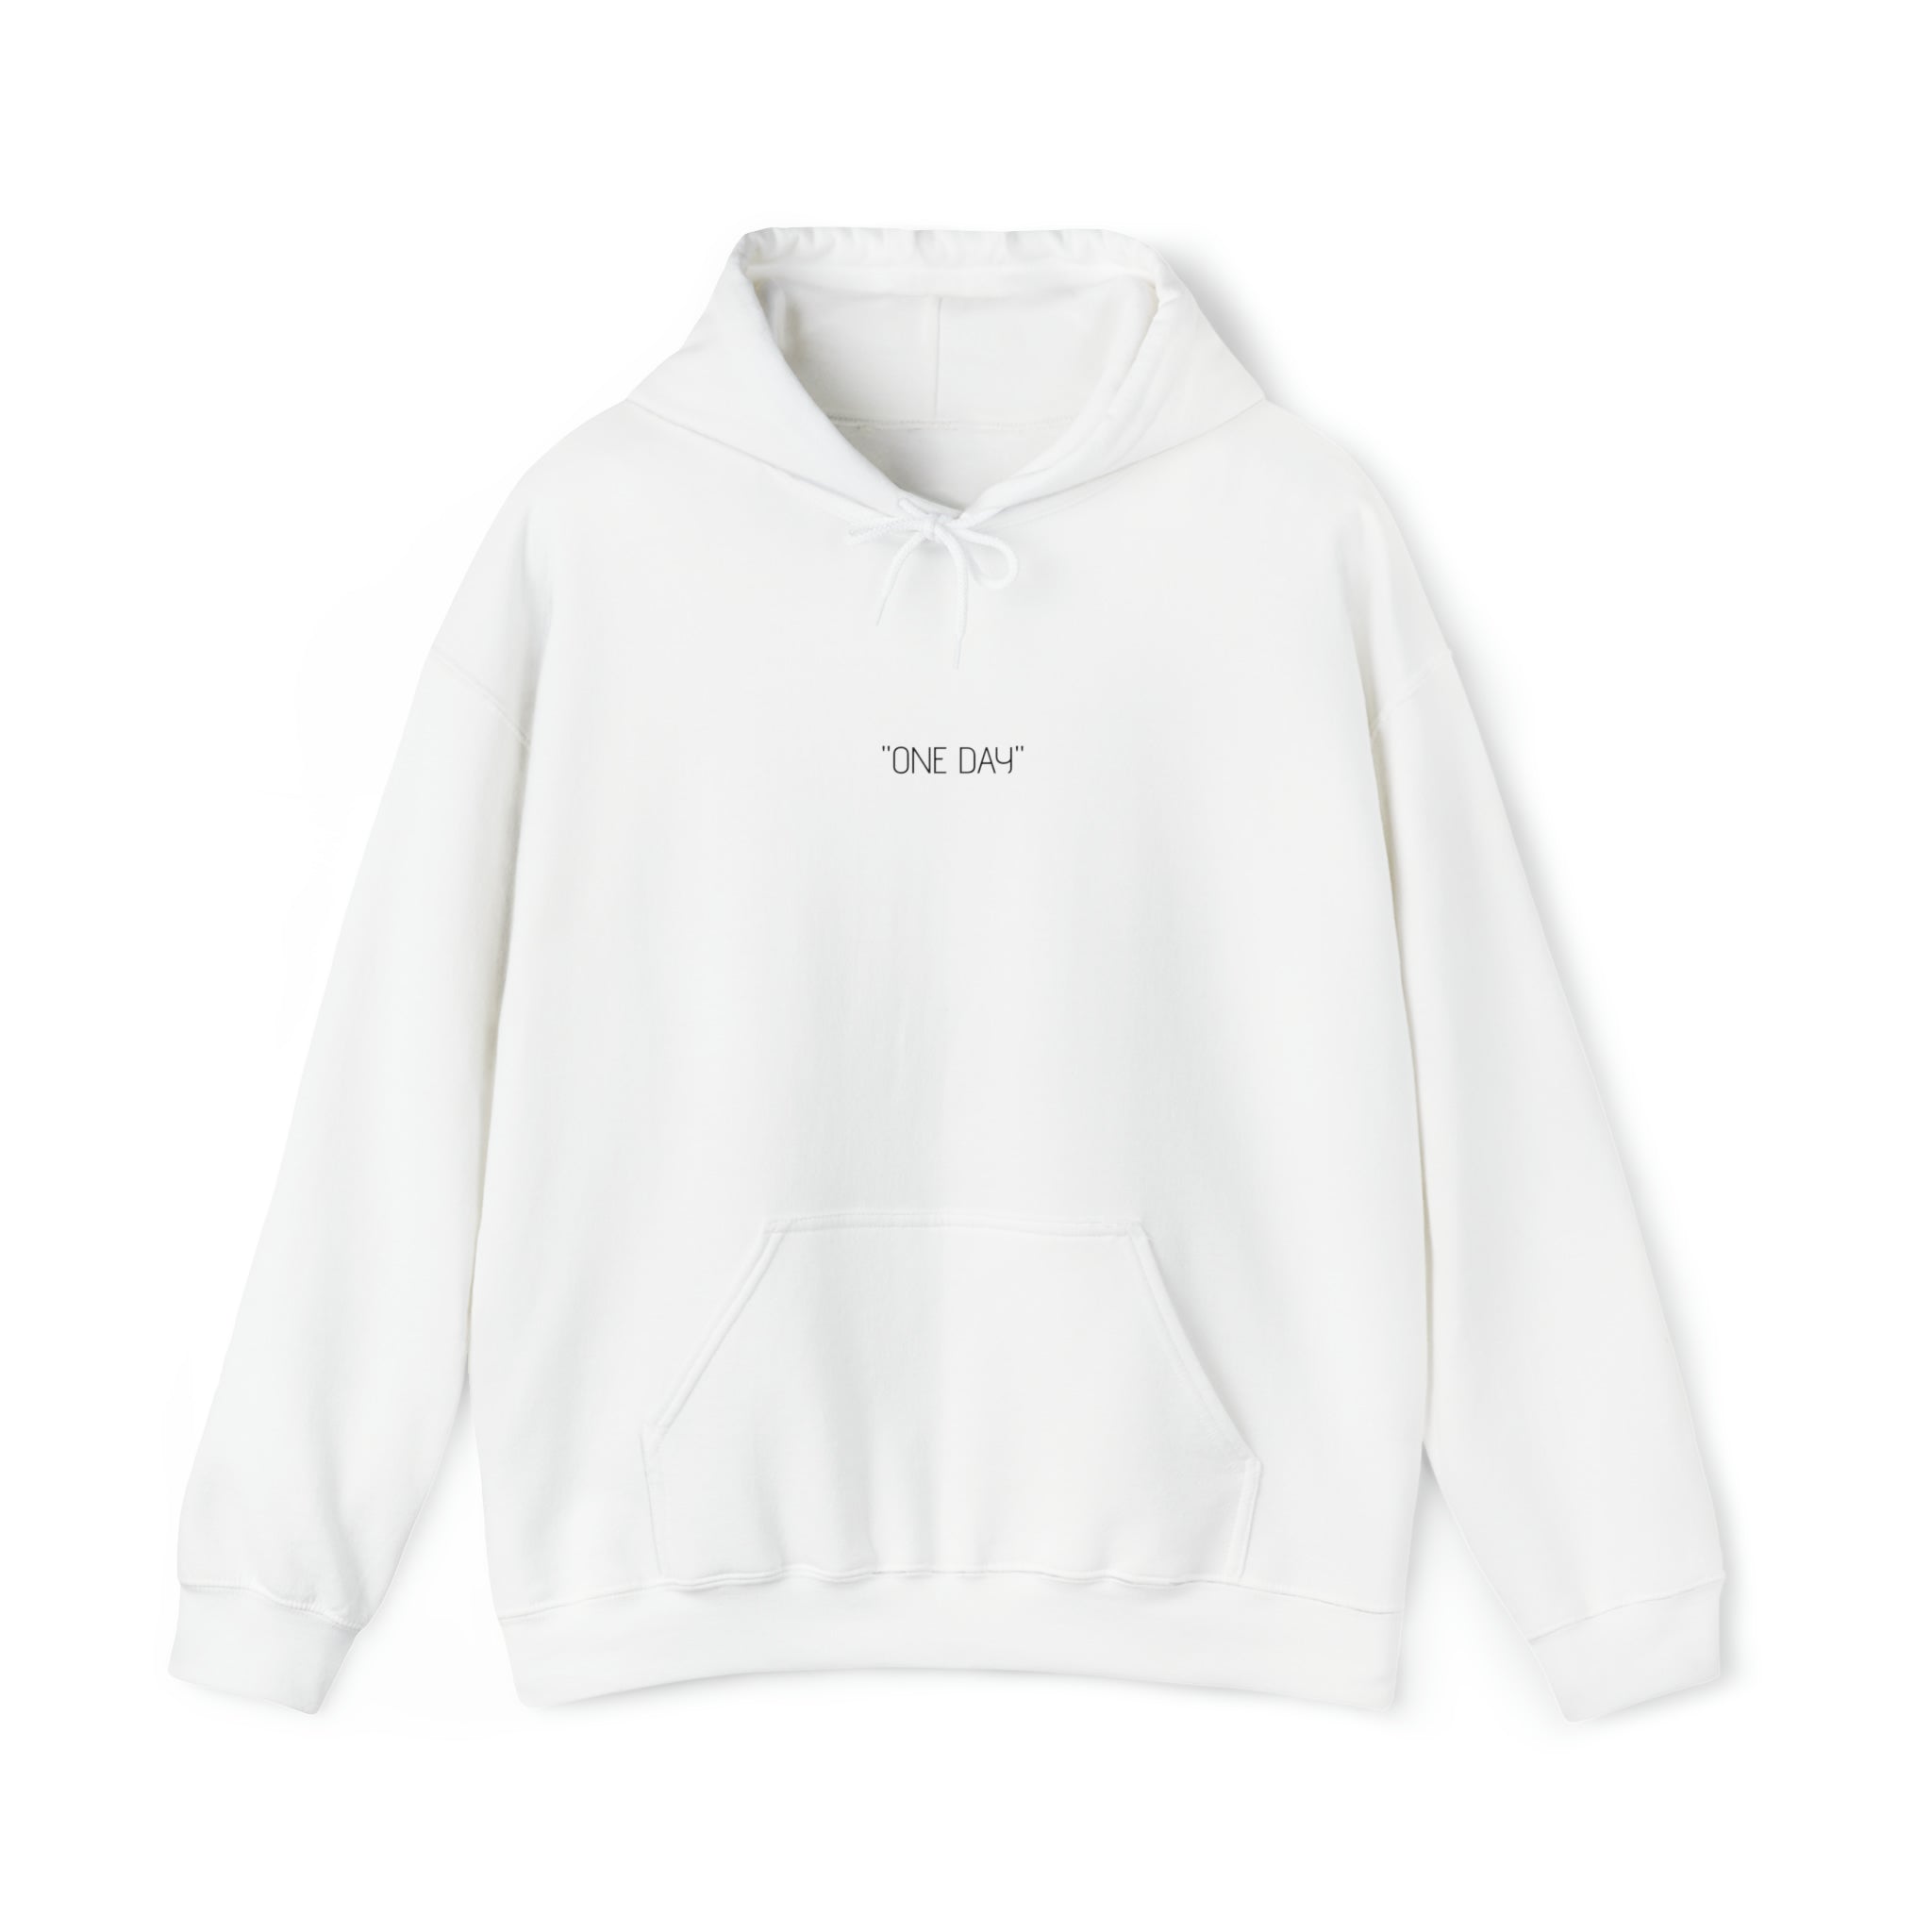 "ONE DAY" motivational cotton hoodie